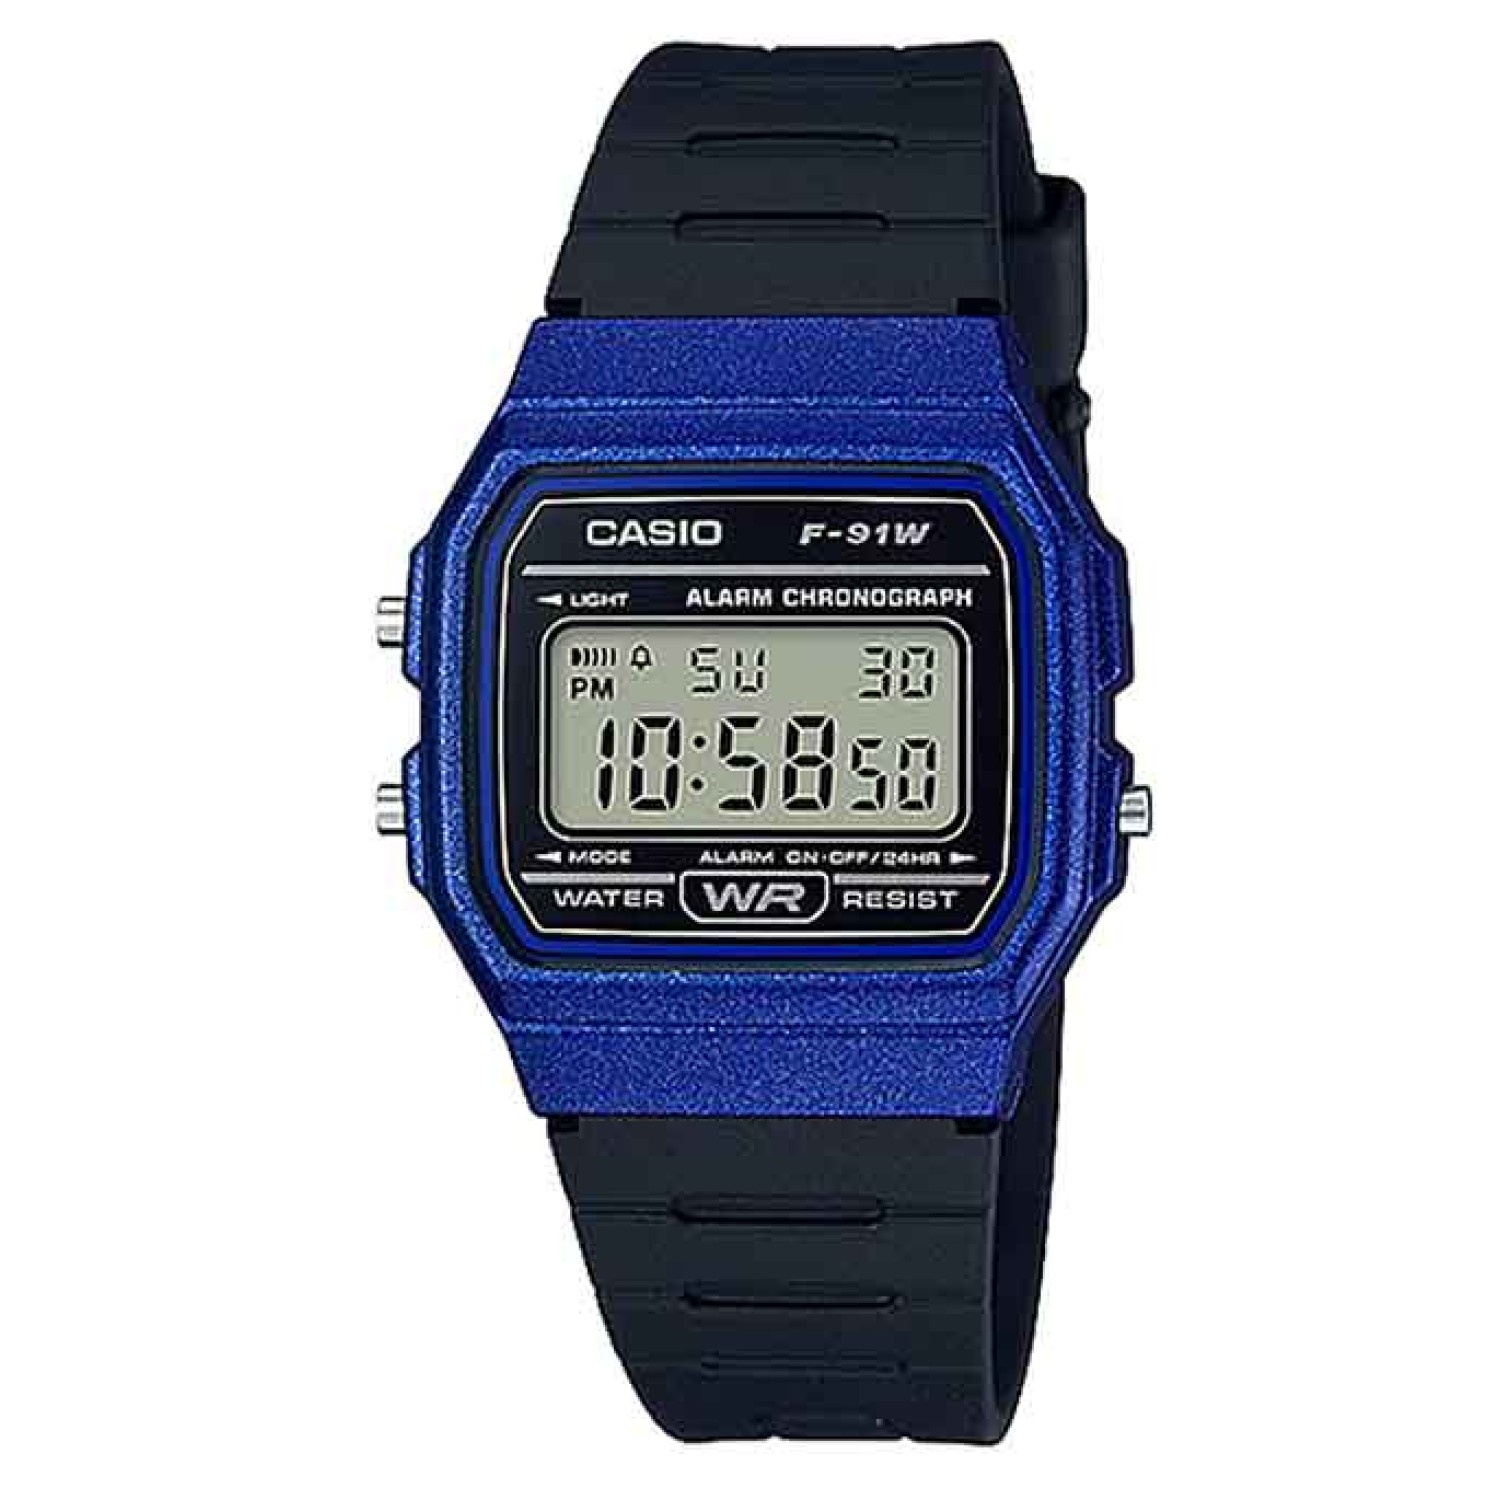 F91WM-2A Casio Digital Watch.   A long time favourite Casio Digital Watch   2 Year Casio Guarantee which is only available at authorised New Zealand Casio Stockists. LAYBUY - Pay it easy, in 6 weekly payments and have @christies.online